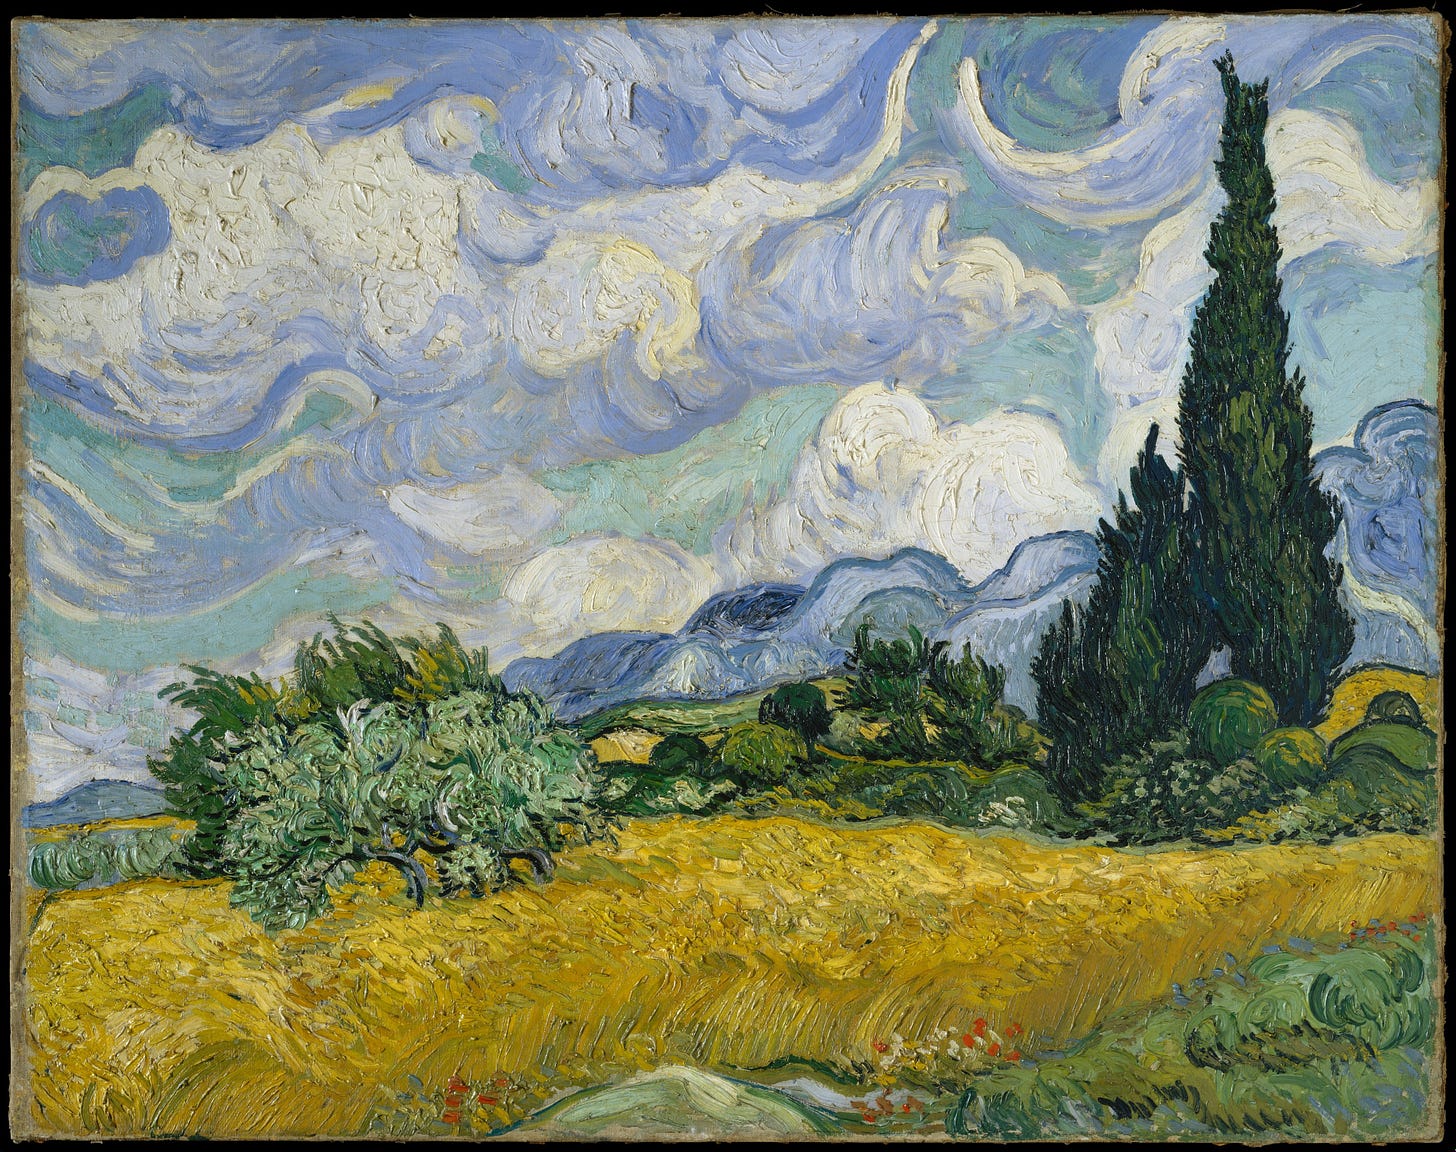 a painting of bright yellow wheat fields with dark cypress trees standing to the right, blue hills in the distance, and swirls of clouds in the sky